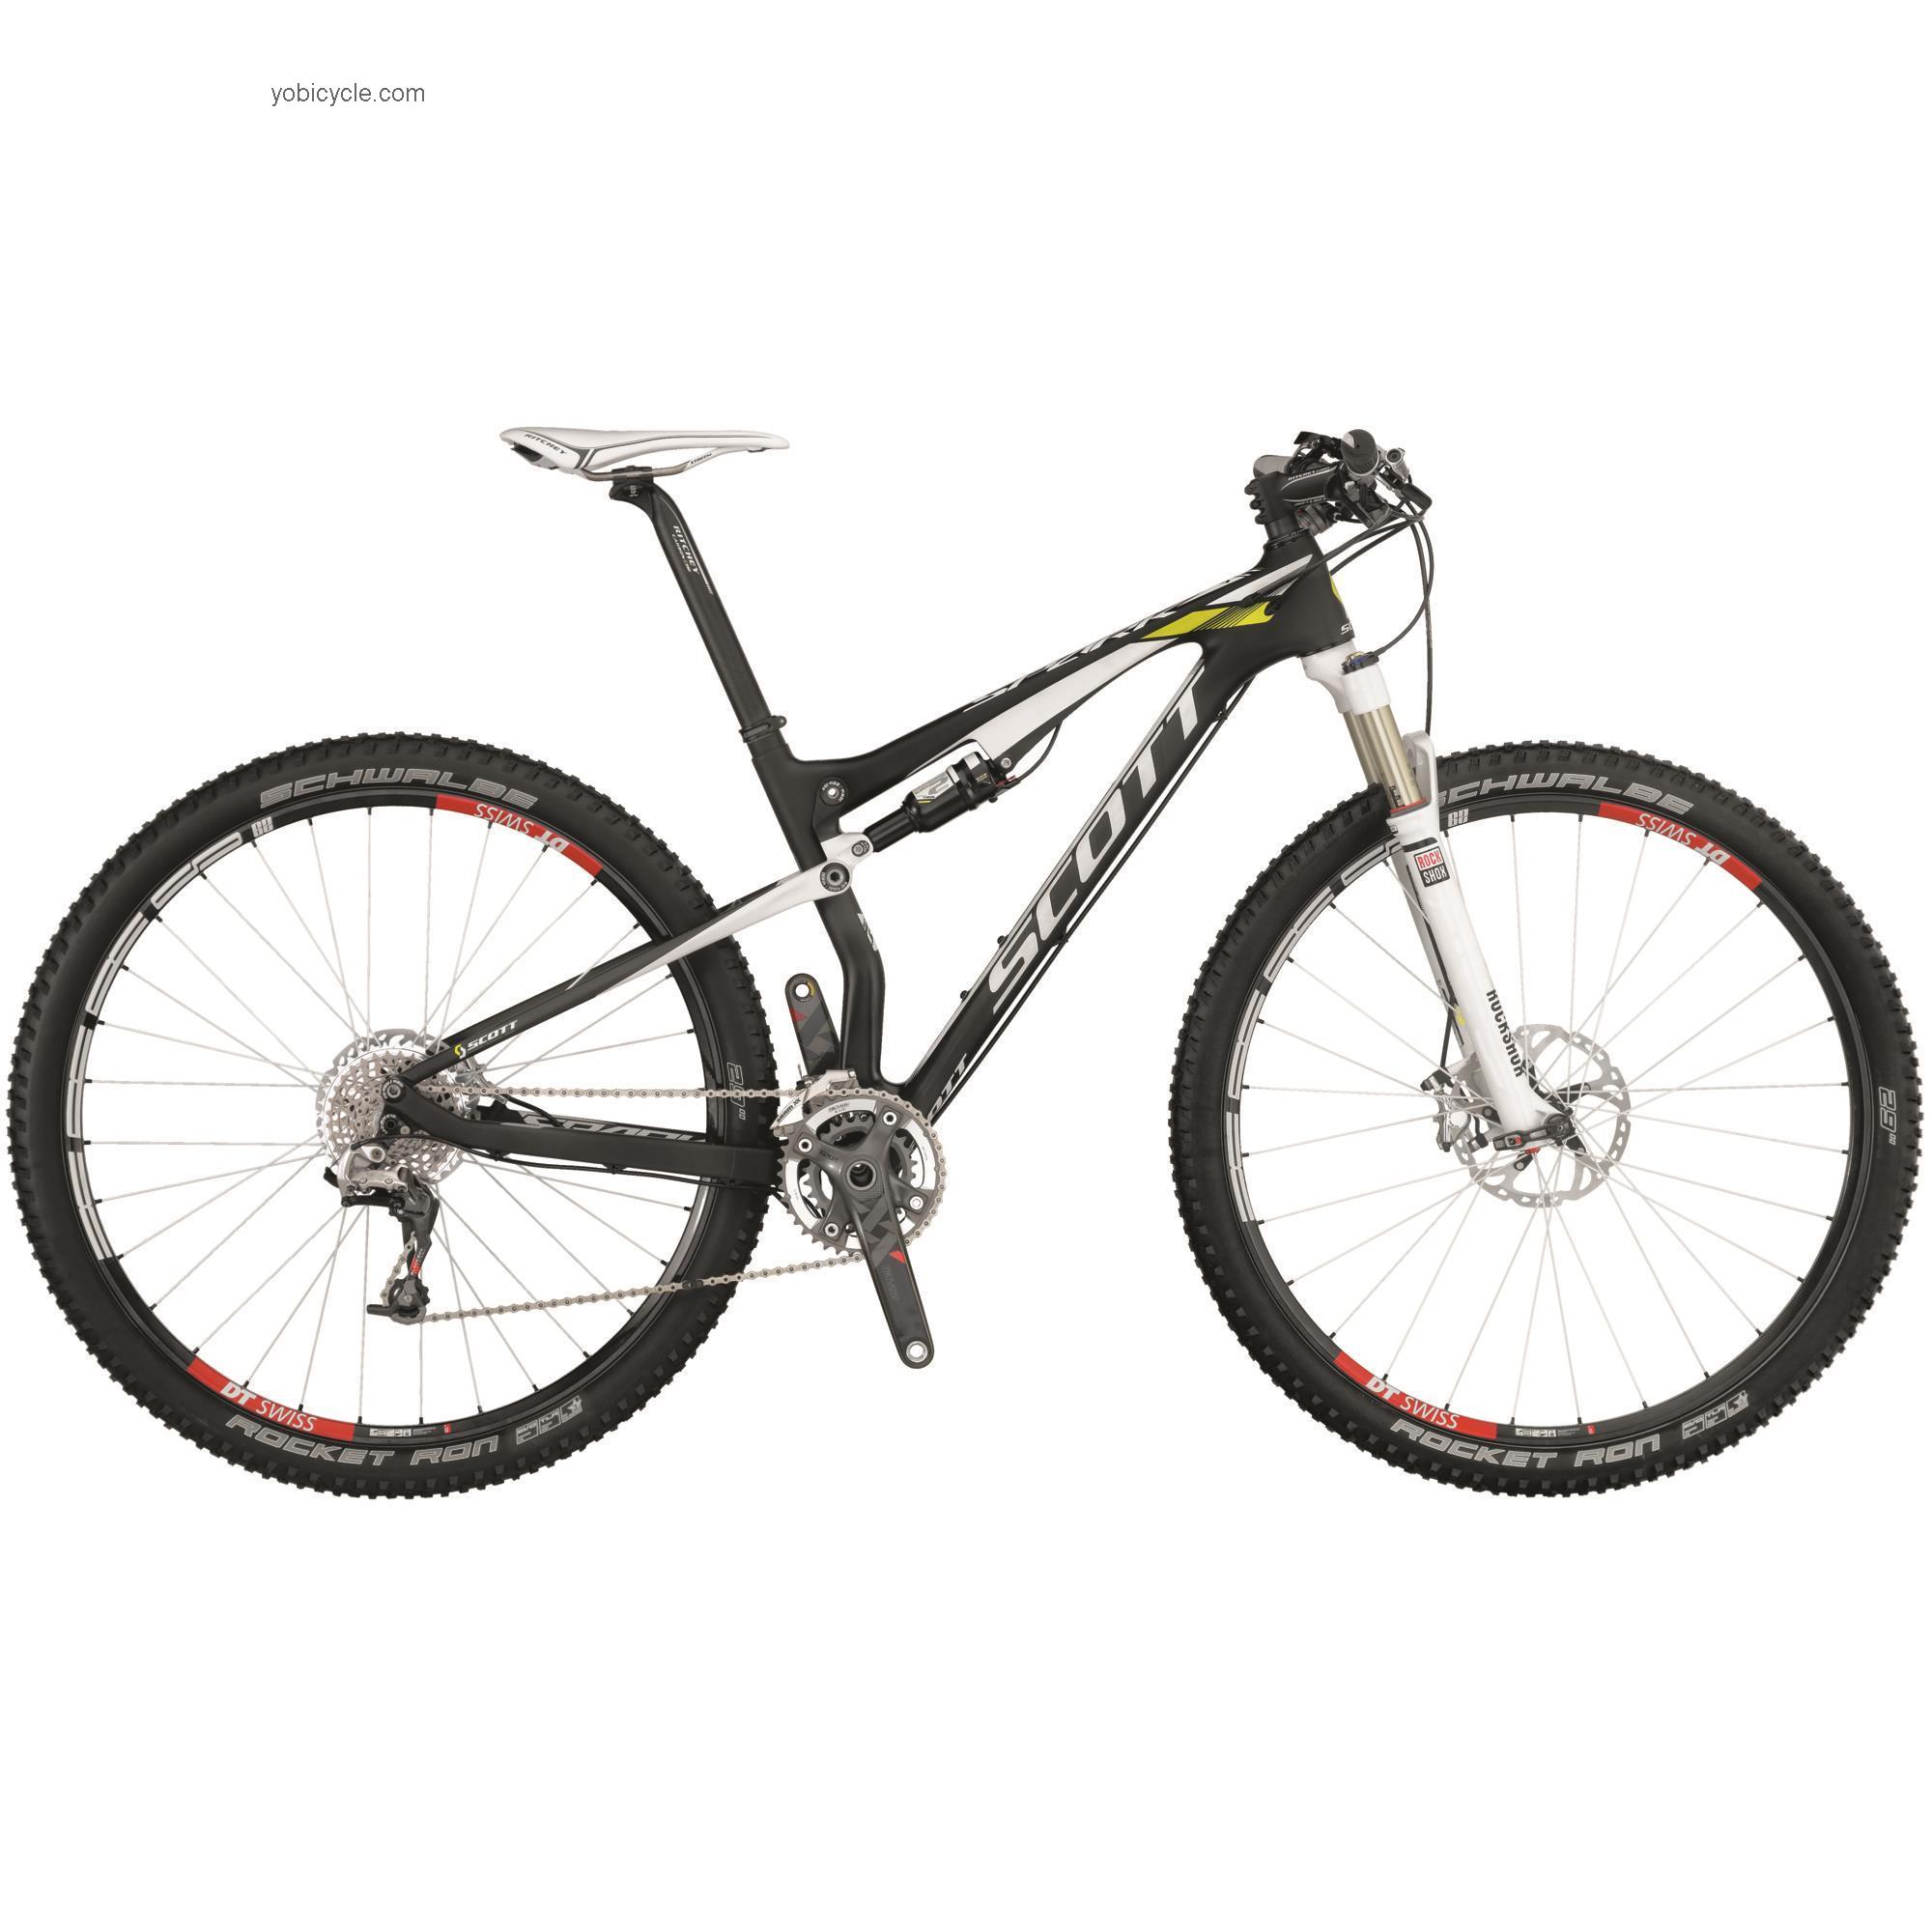 Scott Spark 900 RC competitors and comparison tool online specs and performance